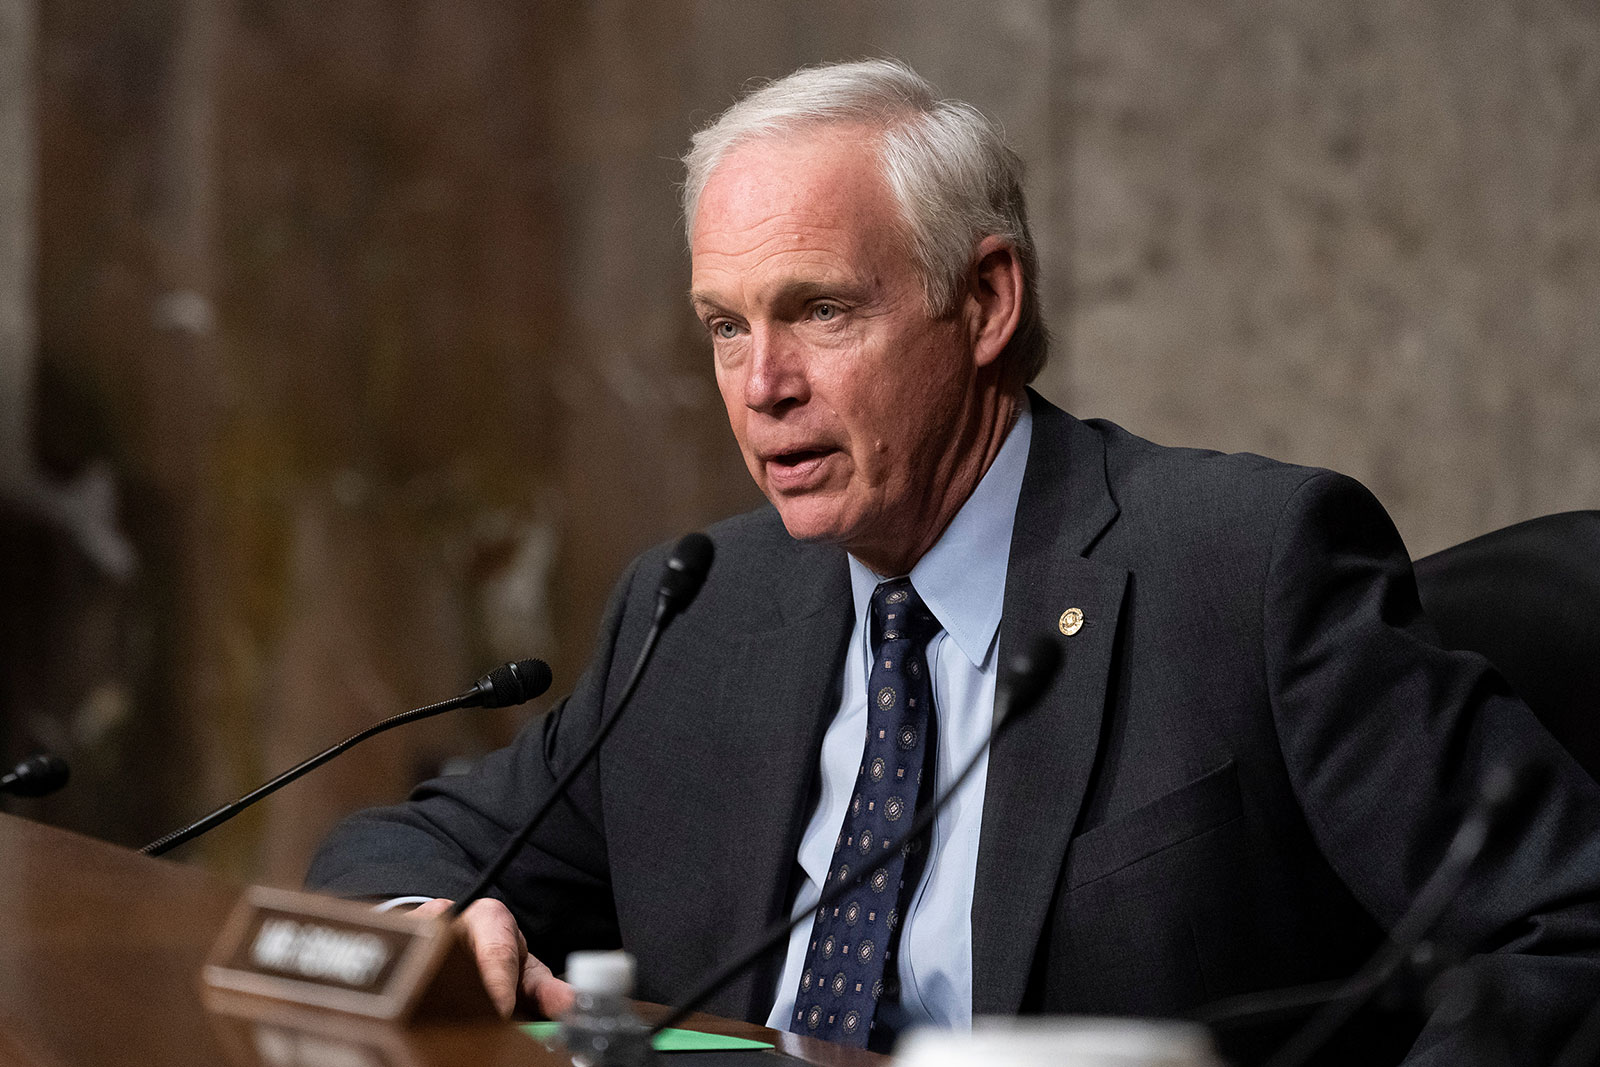 Sen. Ron Johnson speaks during a hearing on Capitol Hill in Washington, DC, on December 7, 2021.  